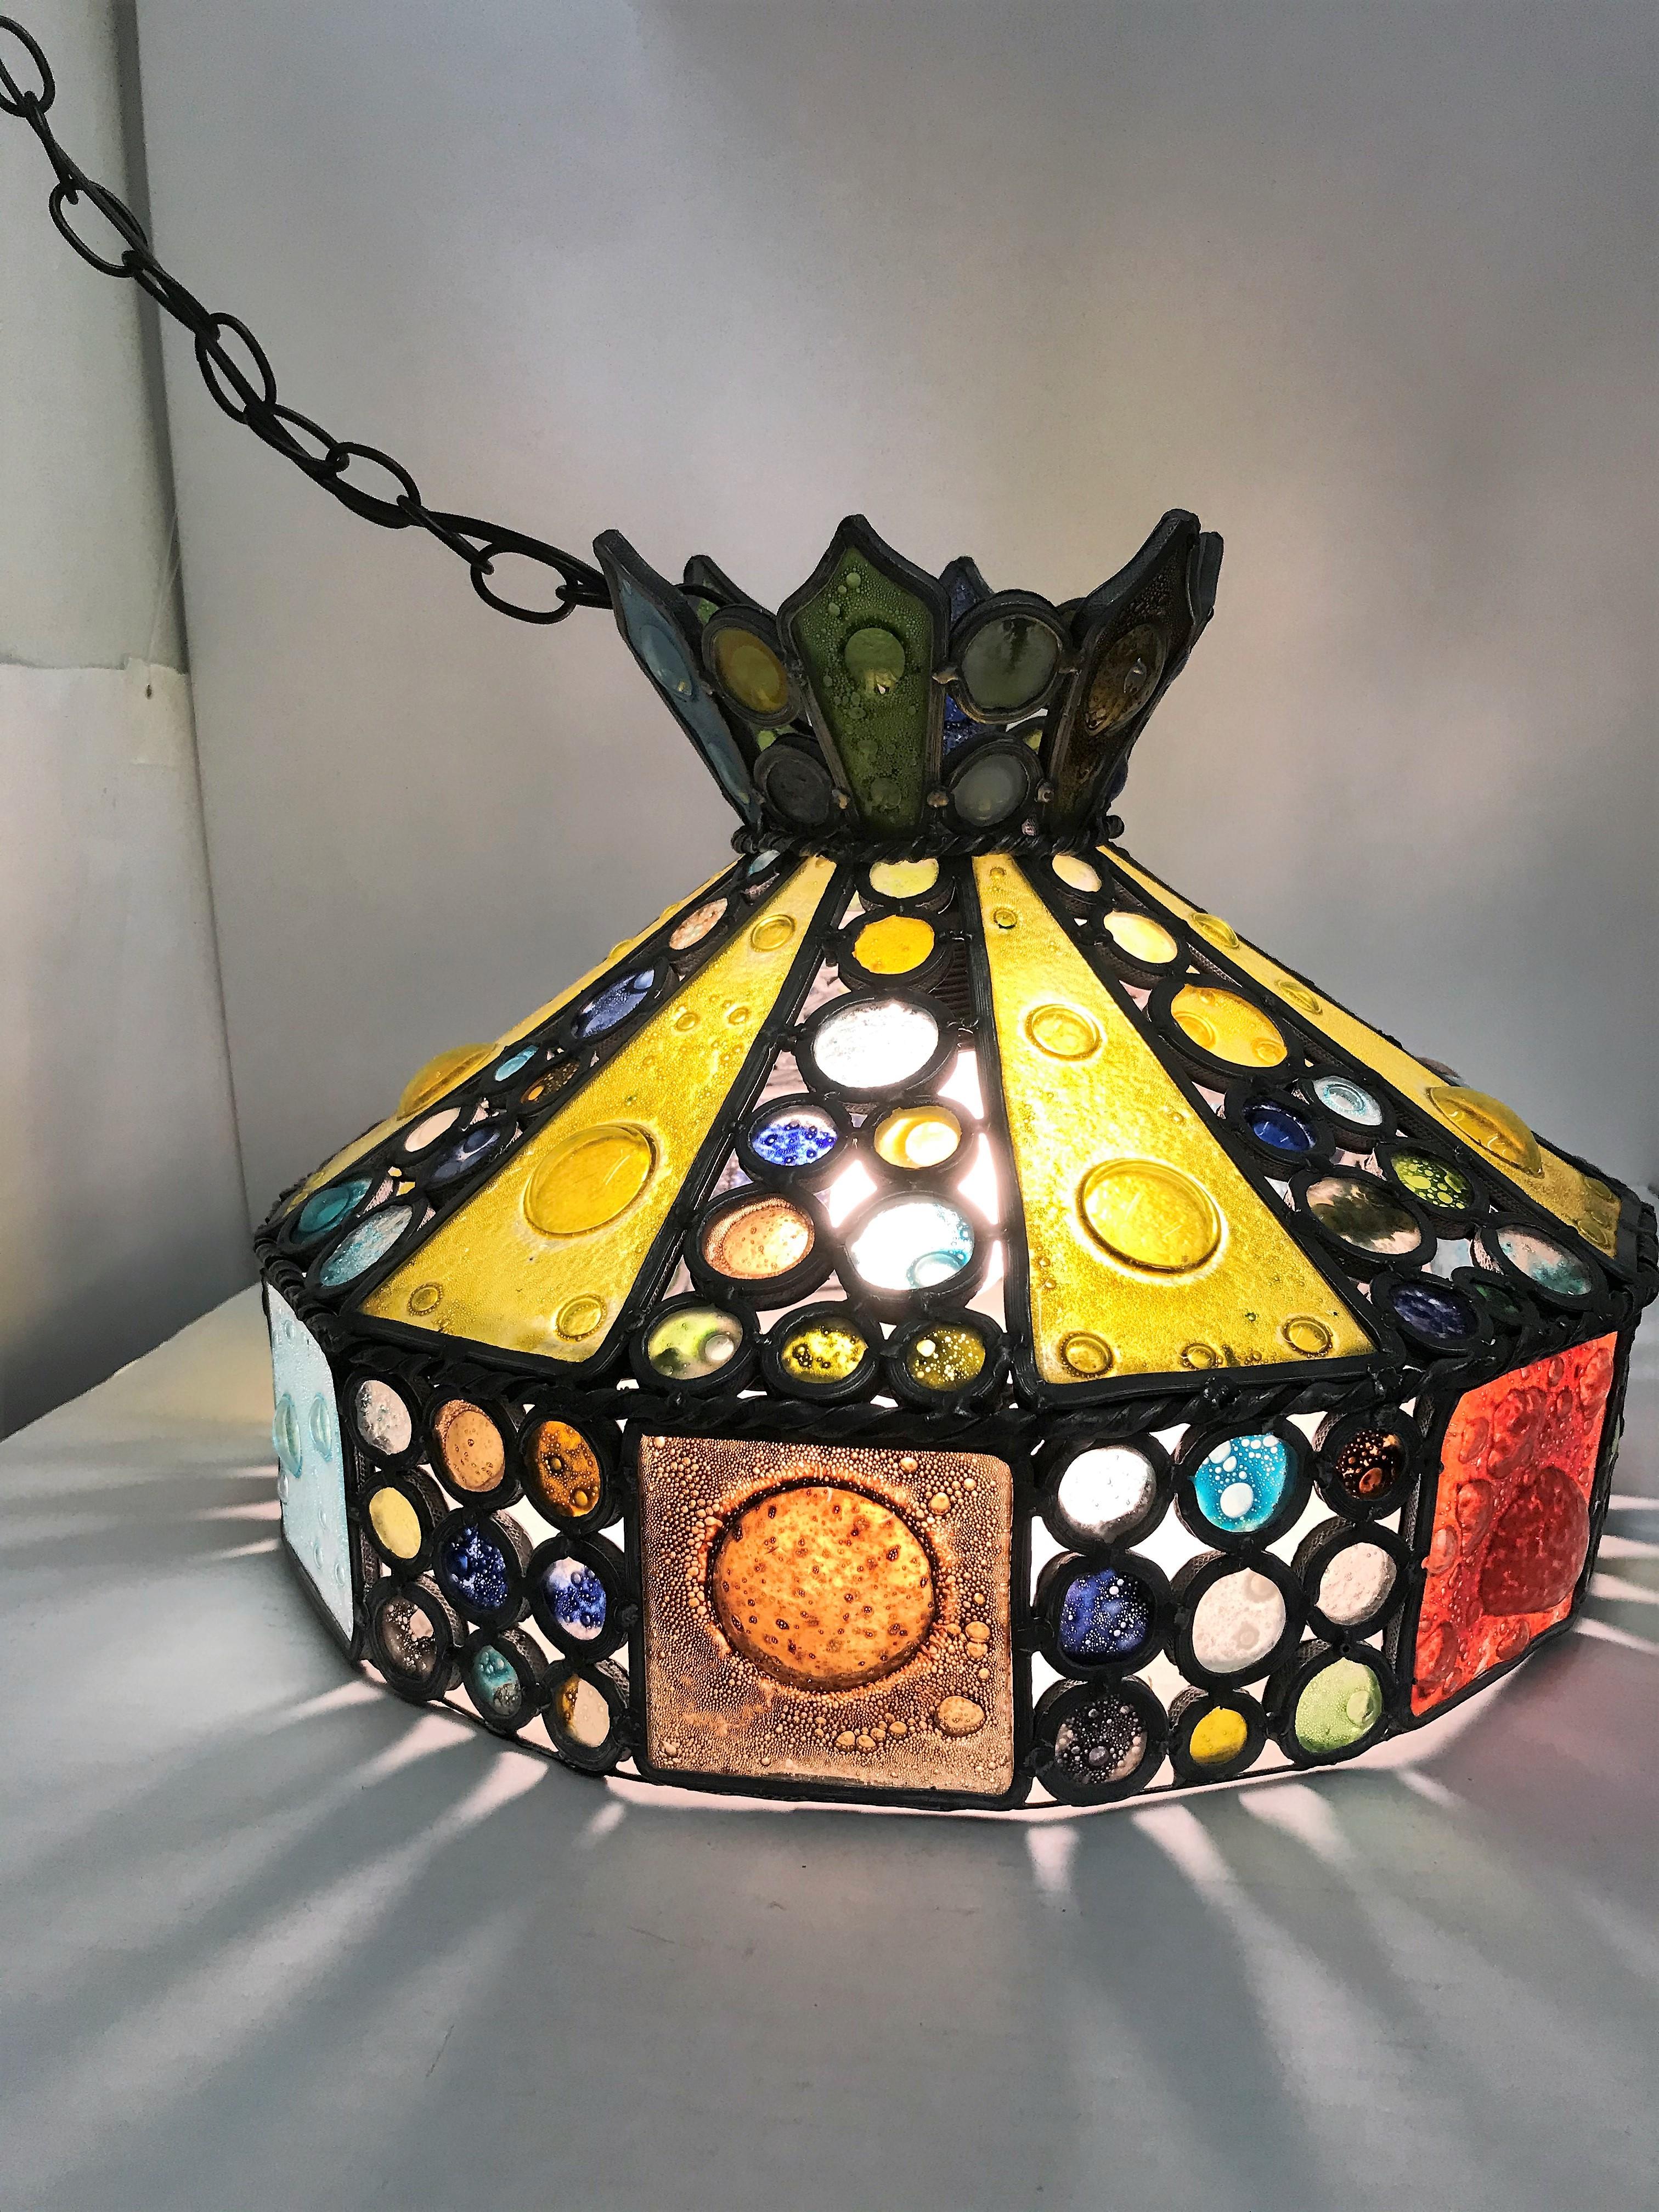 REDUCED FROM $1,200....With a classic Tiffany shape, this multicolored fused glass chandelier features a crown shaped top, sloping sides and horizontal band in bubbly fused glass with lead supports. Glass panels and jewel like circles throughout.